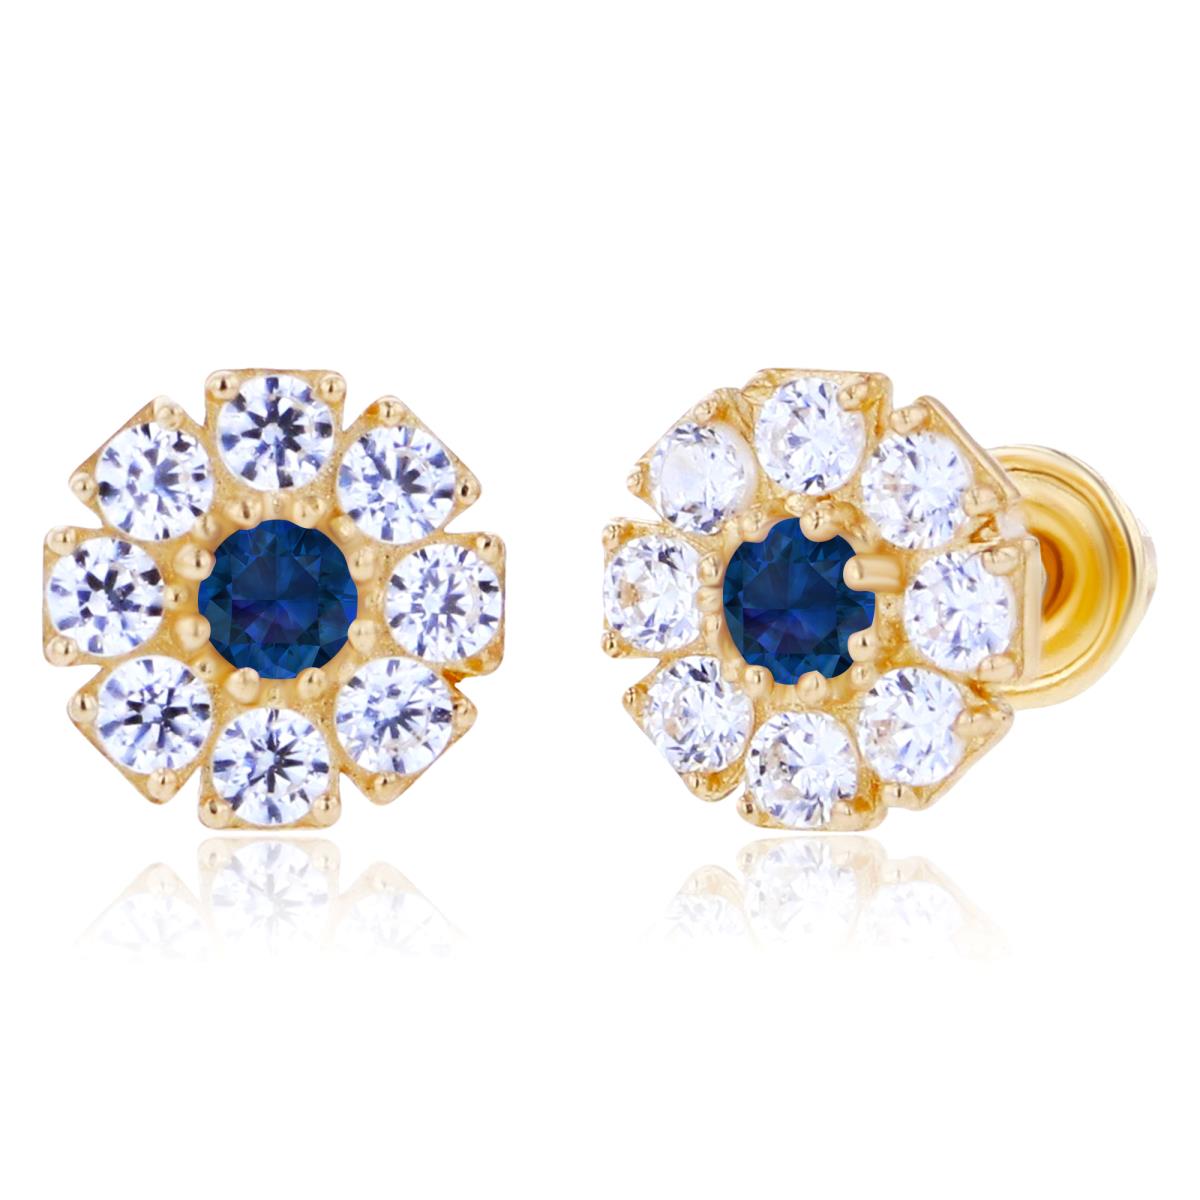 14K Yellow Gold 2mm Round Created Blue Sapphire & 1.5mm Created White Sapphire Flower Screwback Earrings